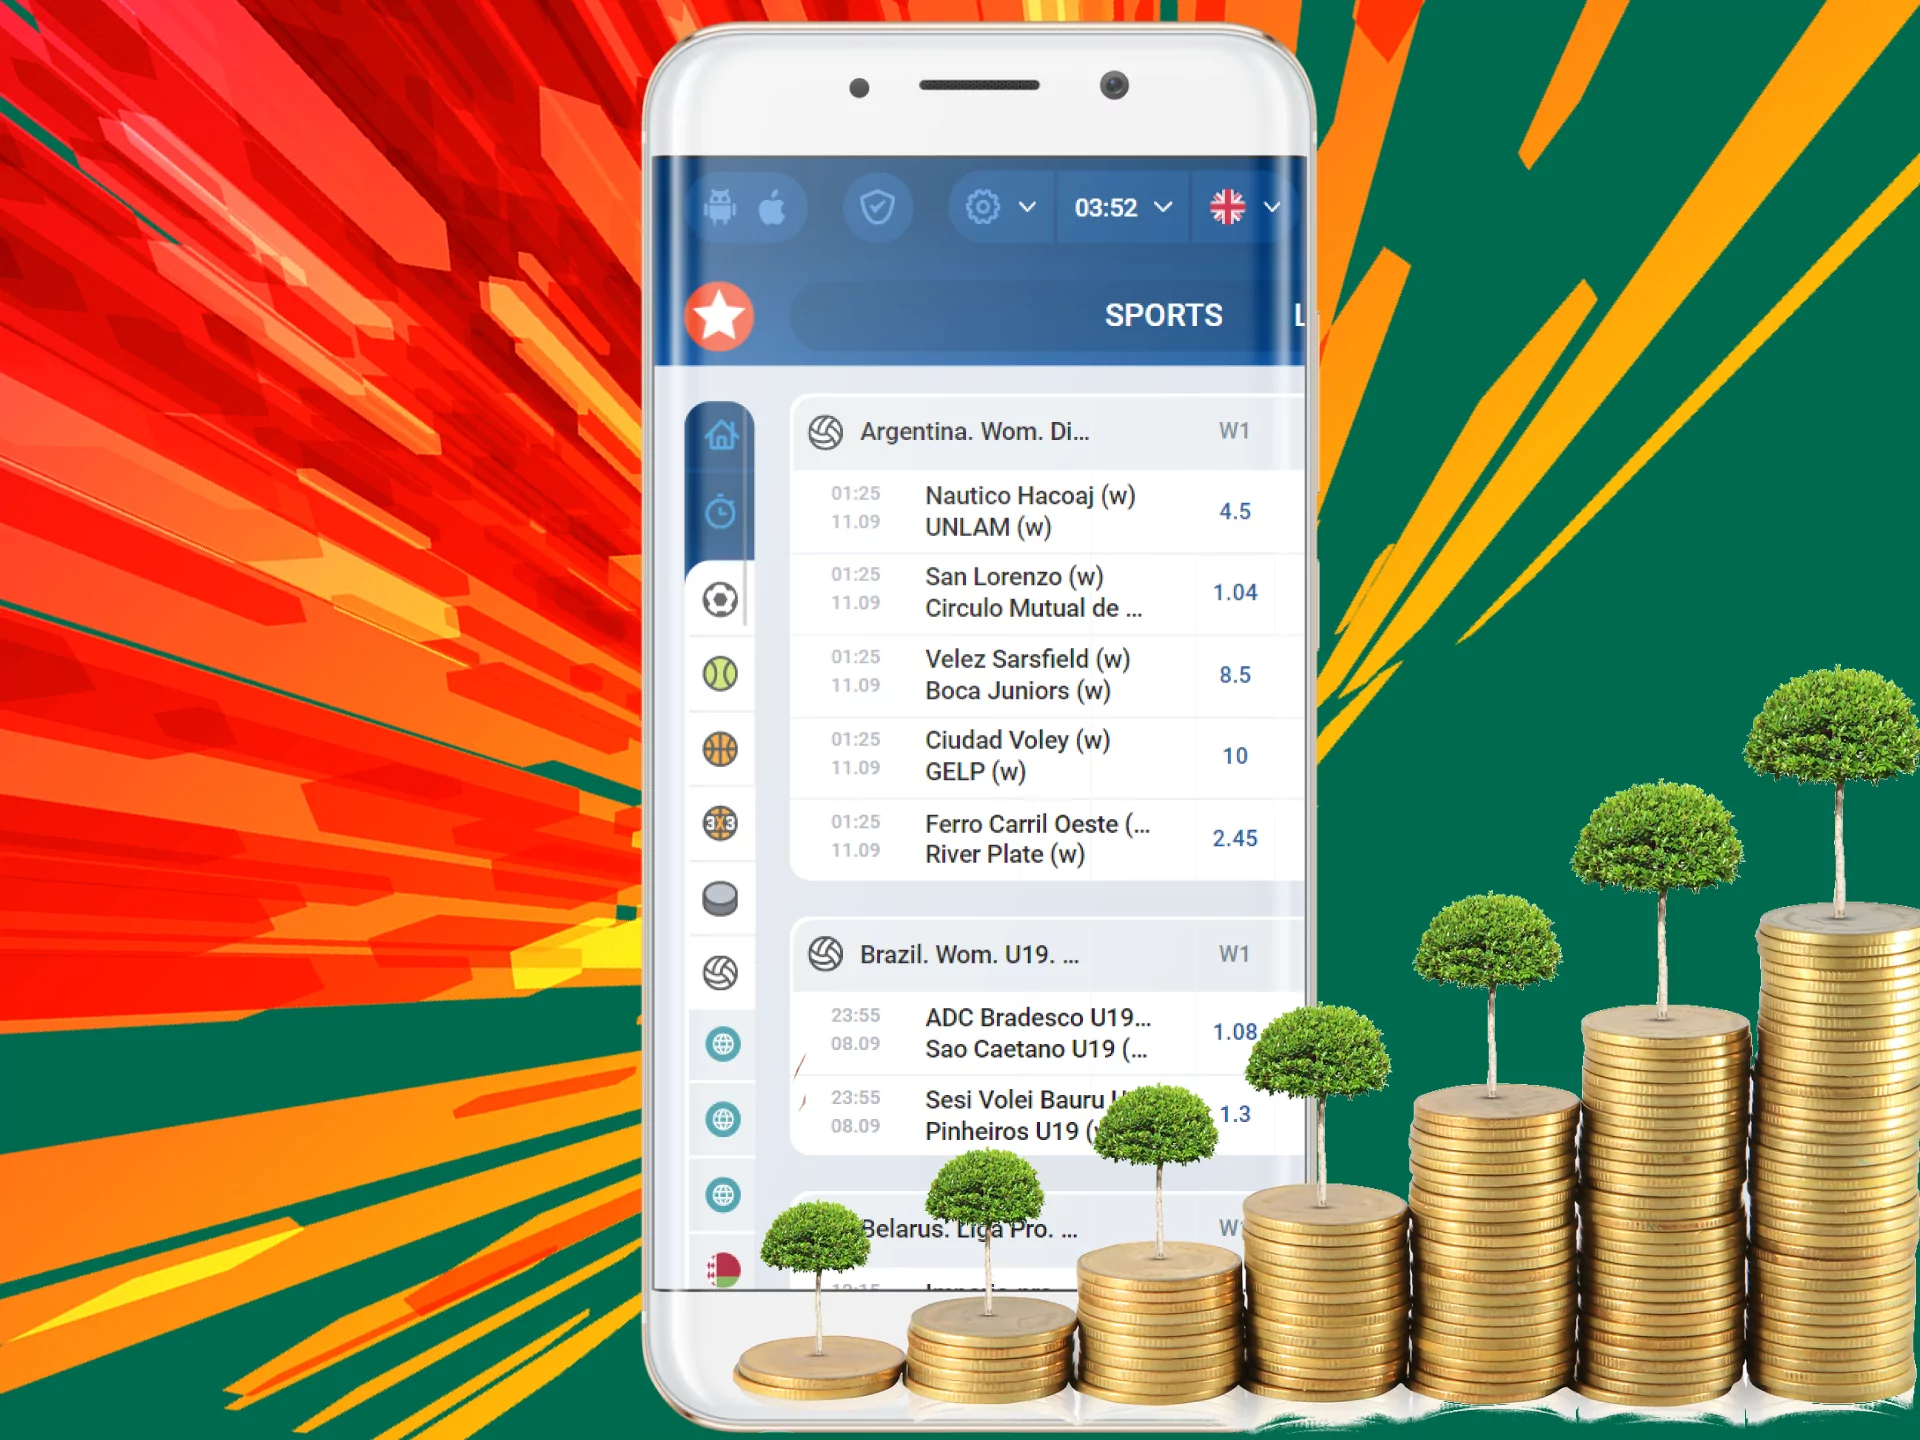 Choose an event, specify an amoun of money and place a bet.